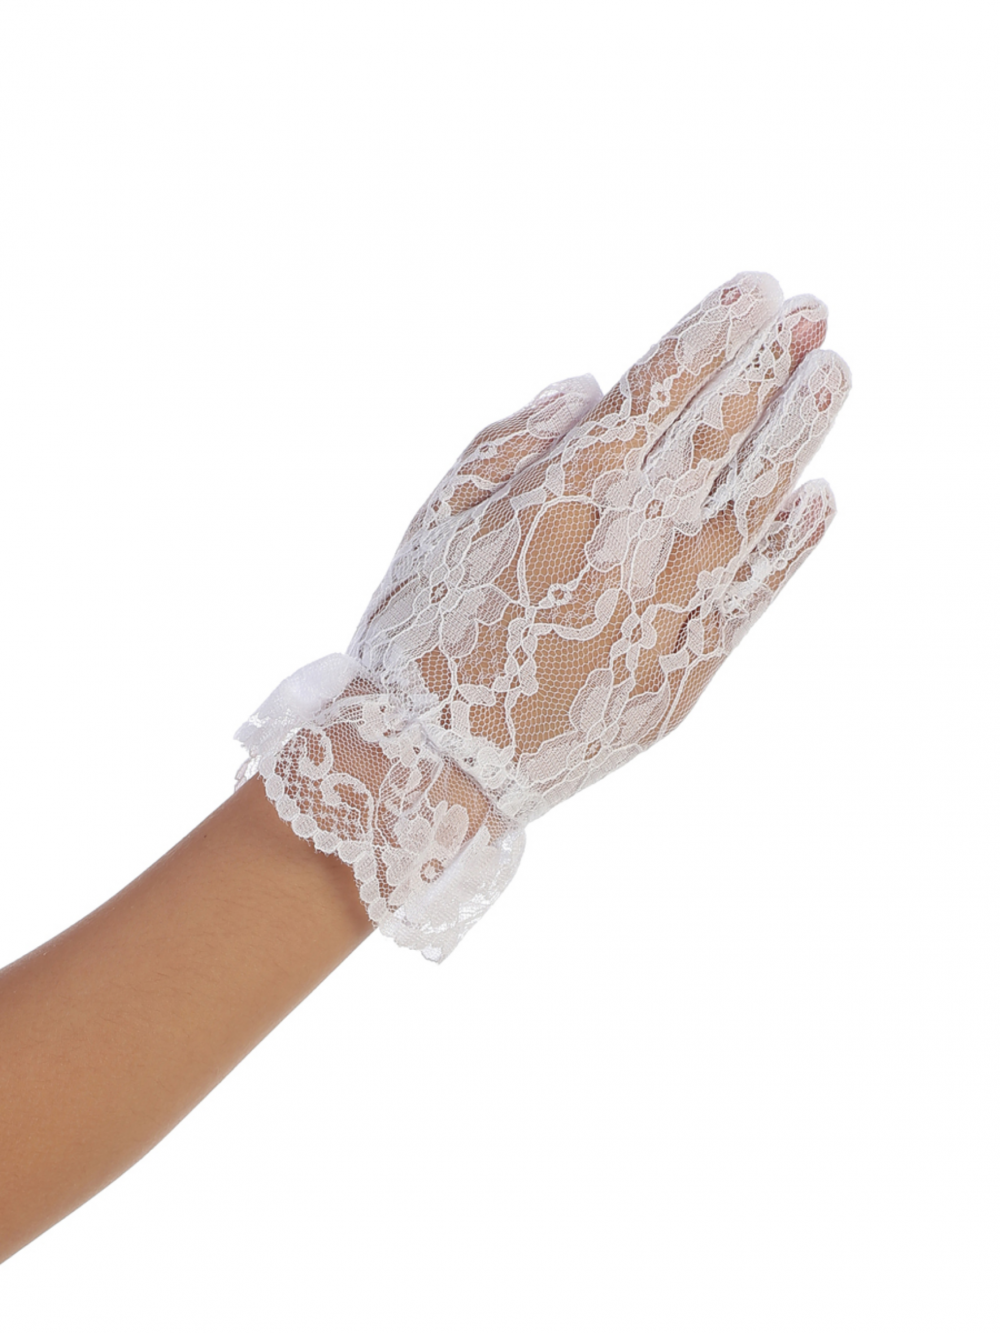 Girl's Wrist Length Lace First Communion Gloves